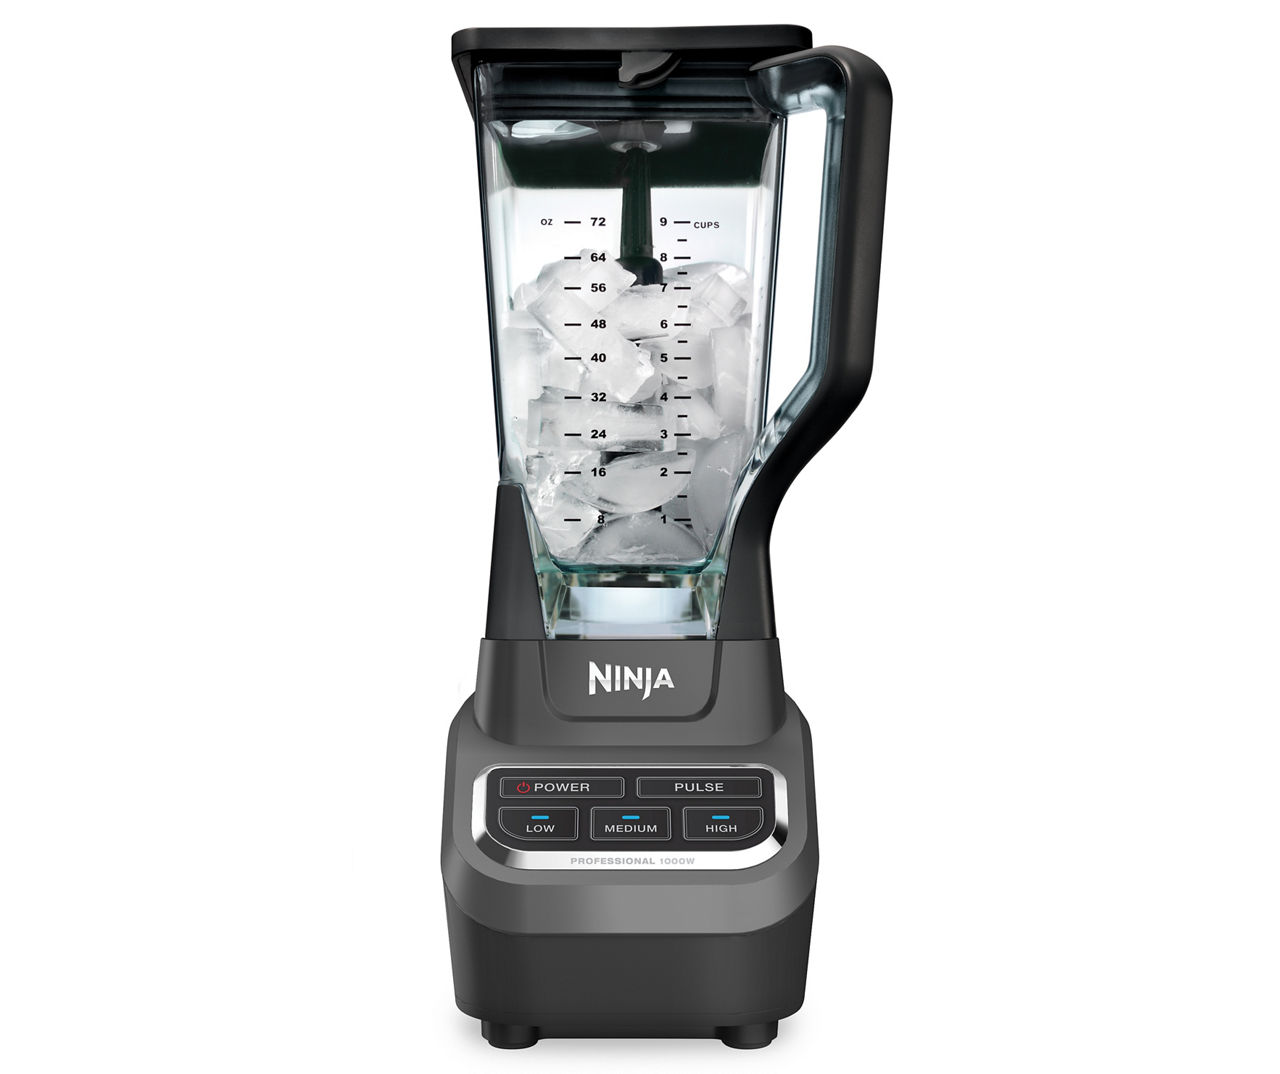 Ninja Professional 1000W blender, like new, enormous discount for